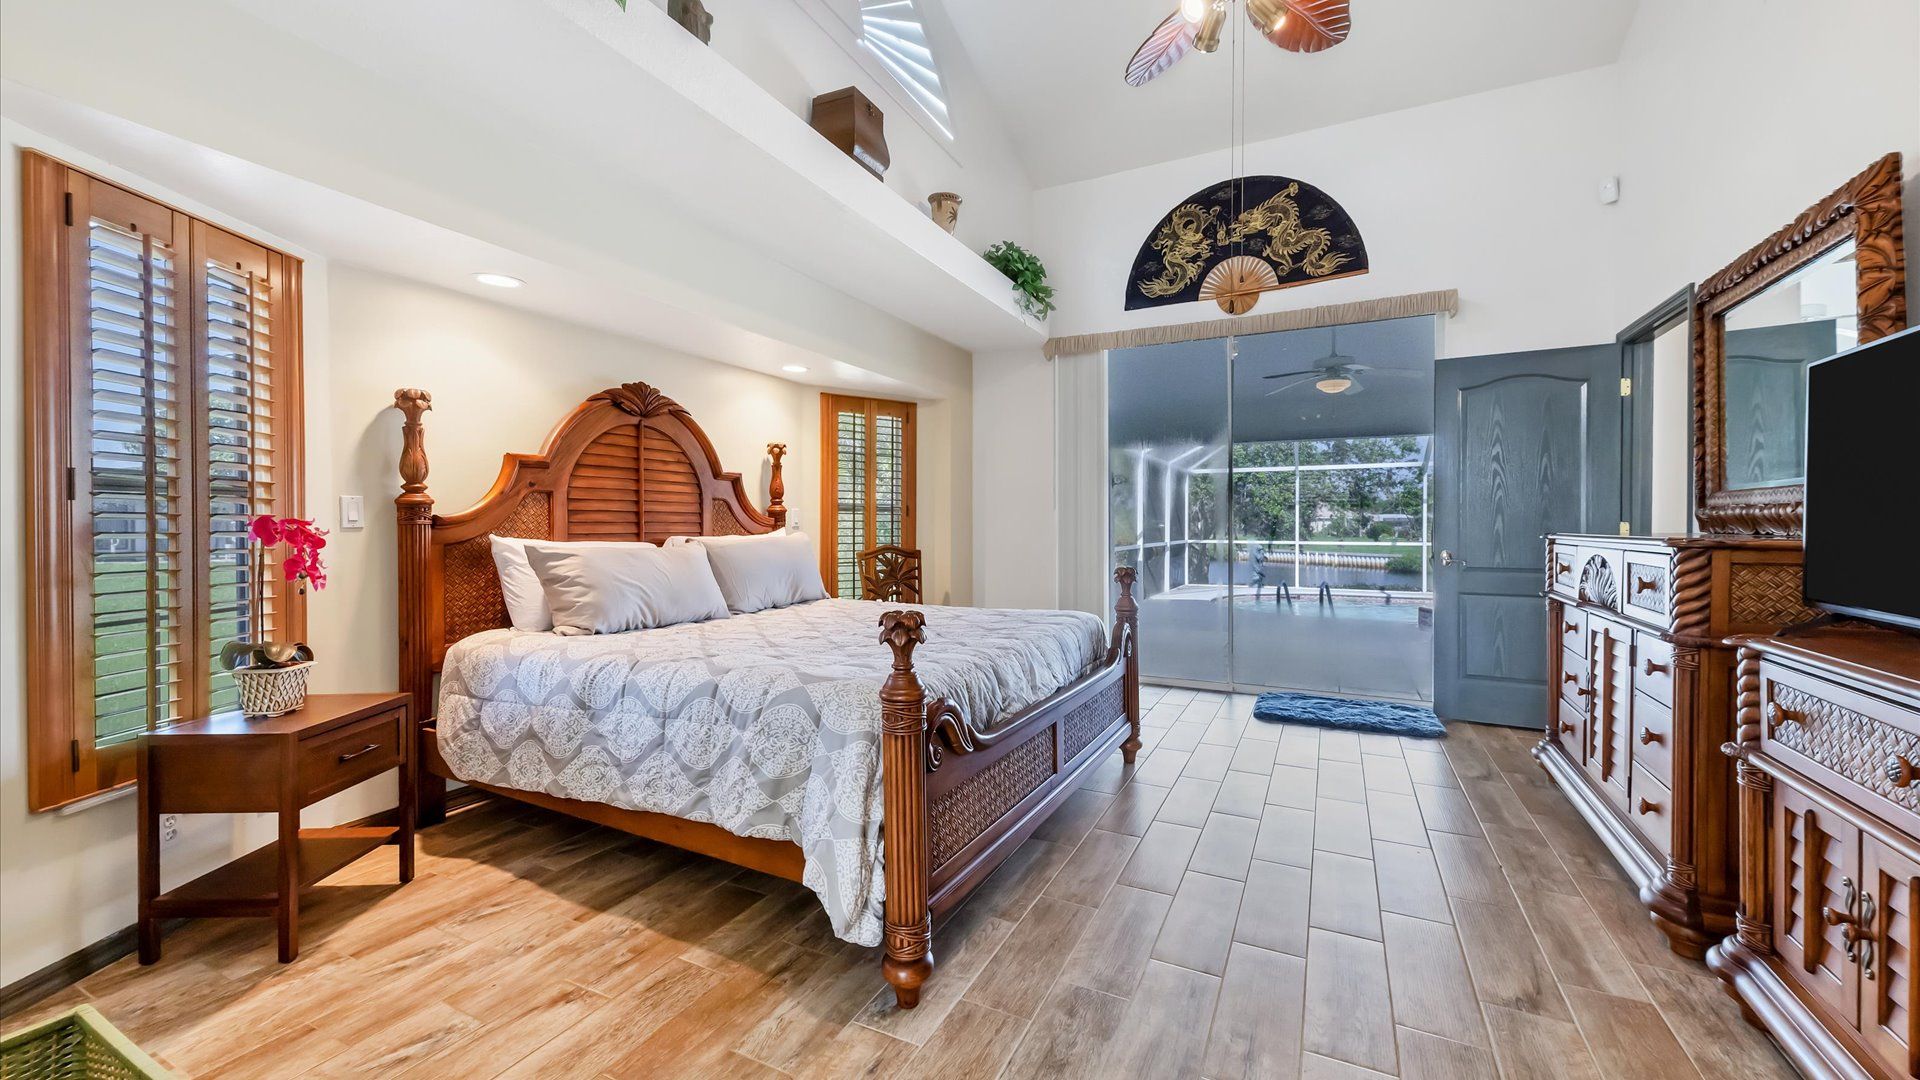 Master bedroom with king bed and lanai access